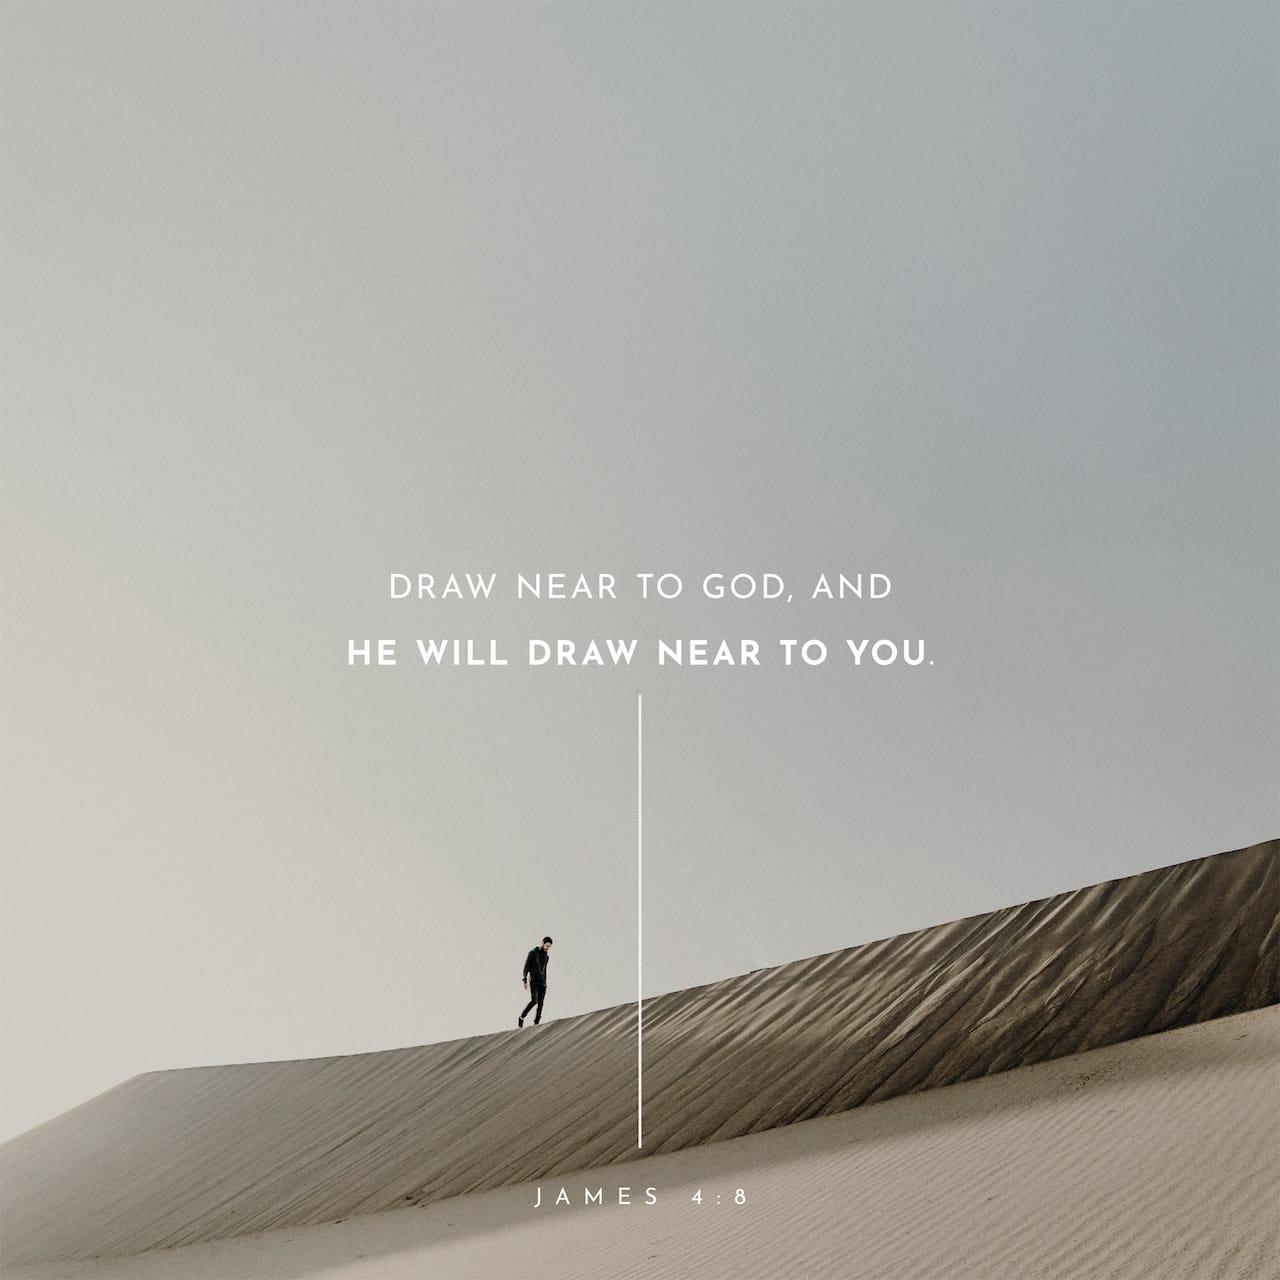 Bible Verse of the Day - day 89 - image 28522 (James 4:7-8)